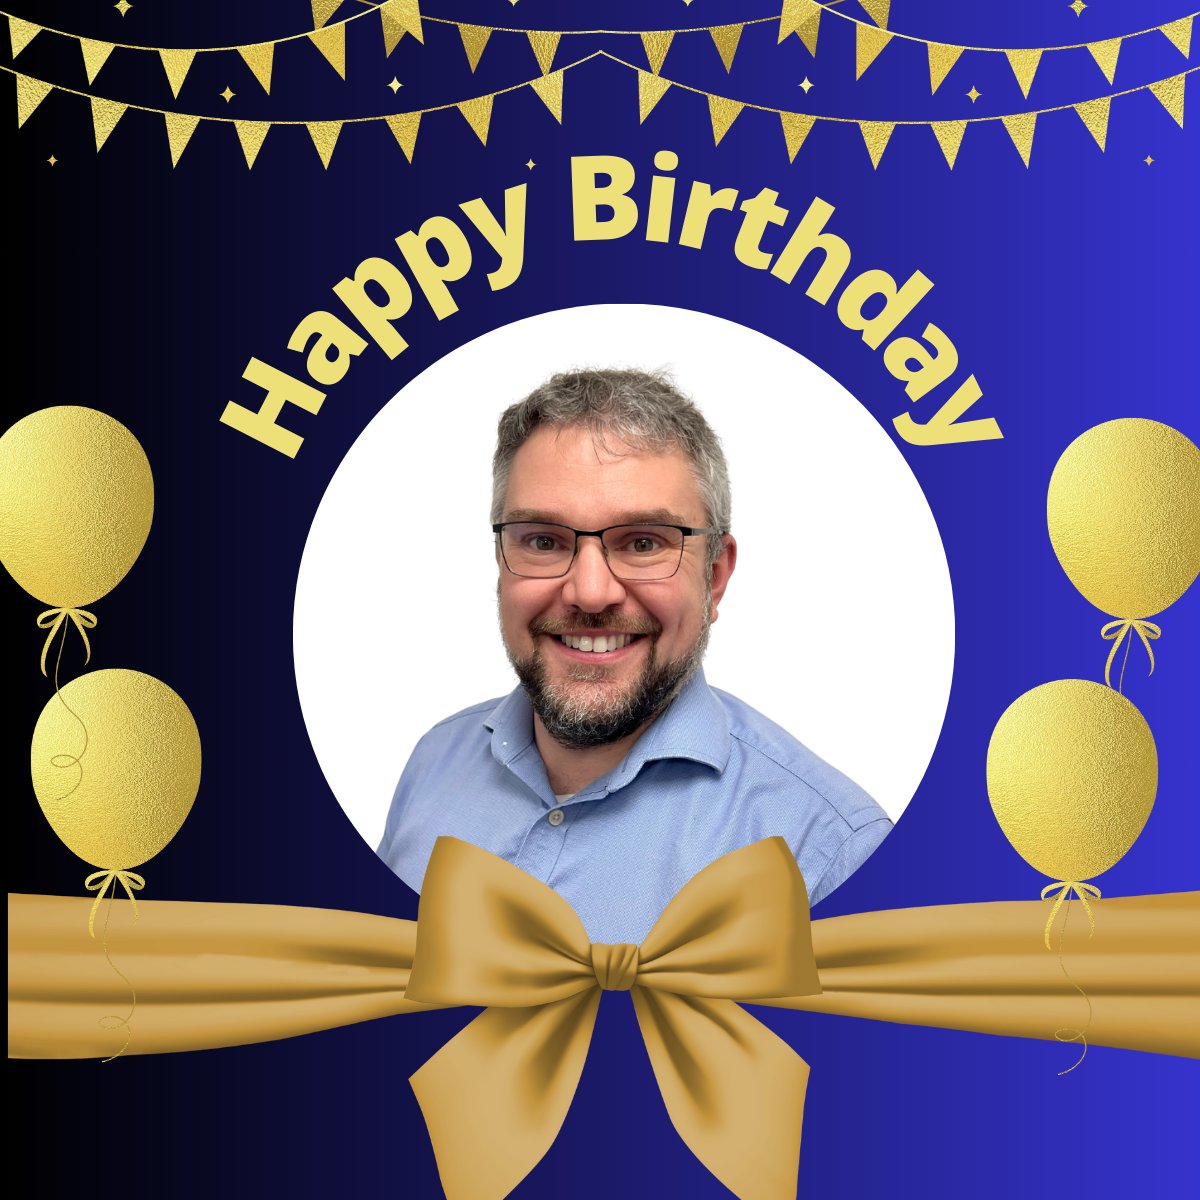 Happy birthday to our Senior Consultant Jonathan Twaites! 🎂🎈 Jonathan joined us last year and has truly become an invaluable asset to the company. His top-notch expertise and knowledge shine through in everything he does. Keep up the amazing work, Jonathan! 🌟